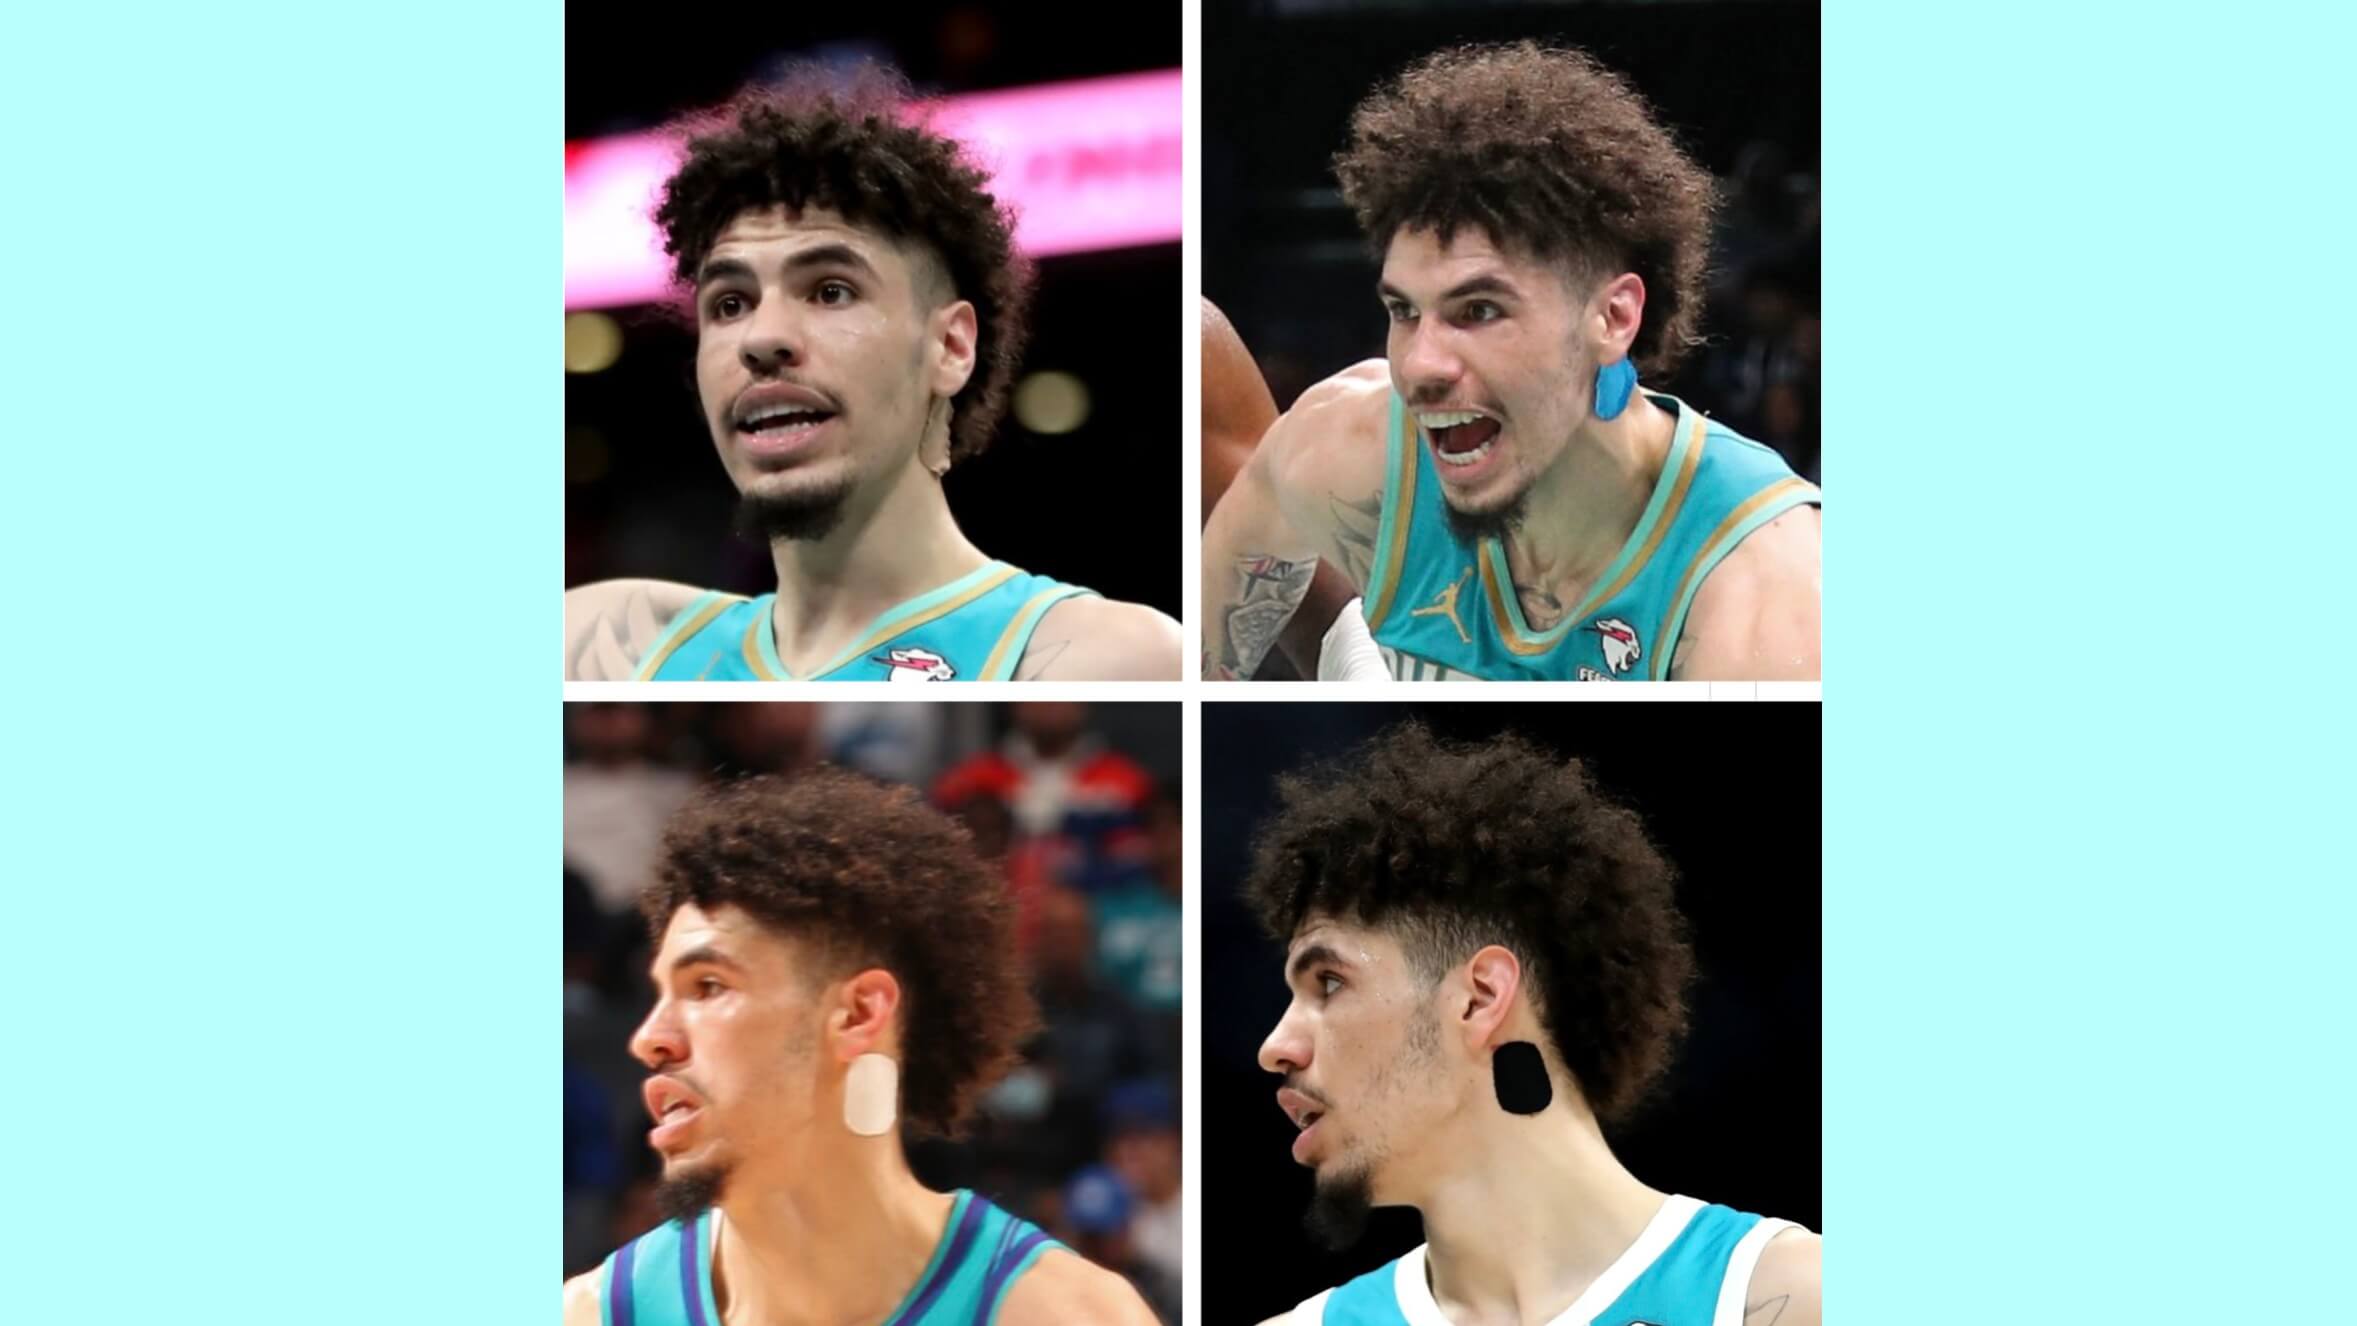 LaMelo Ball's 'LF' tattoo violates the NBA's policy against commercial